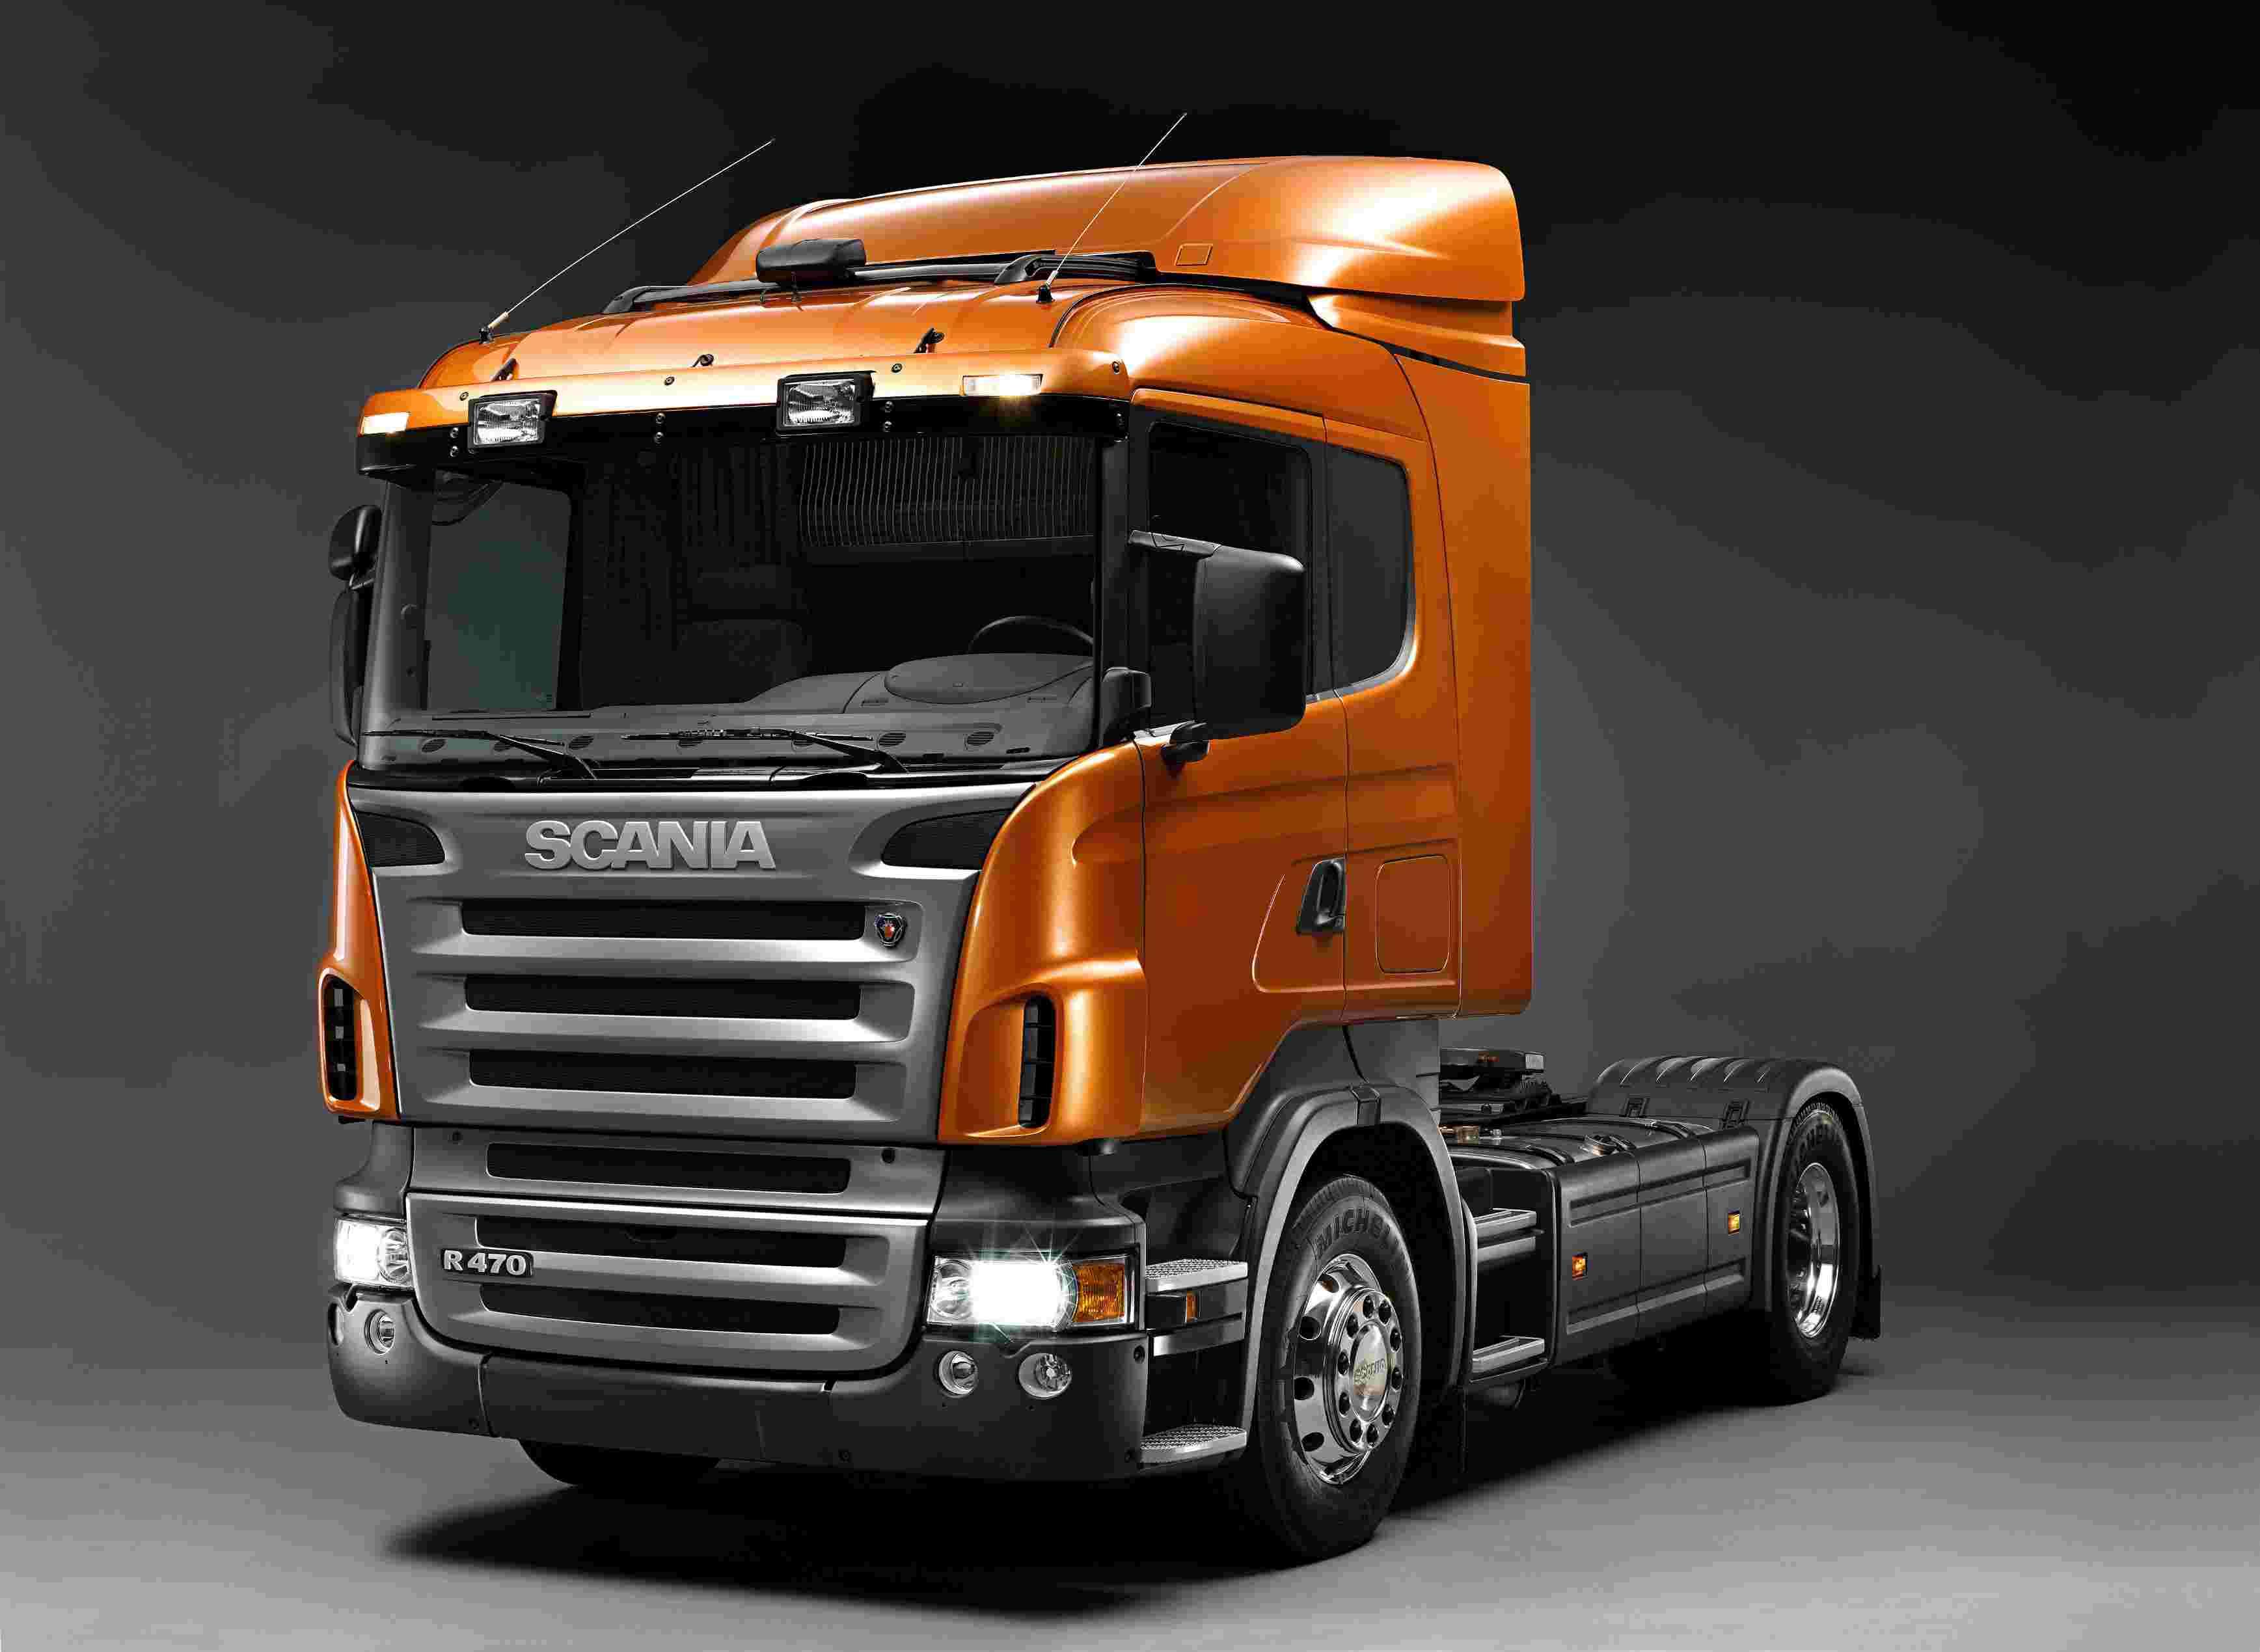 Original Scania R Truck 9367 HD Wallpapers Pictures